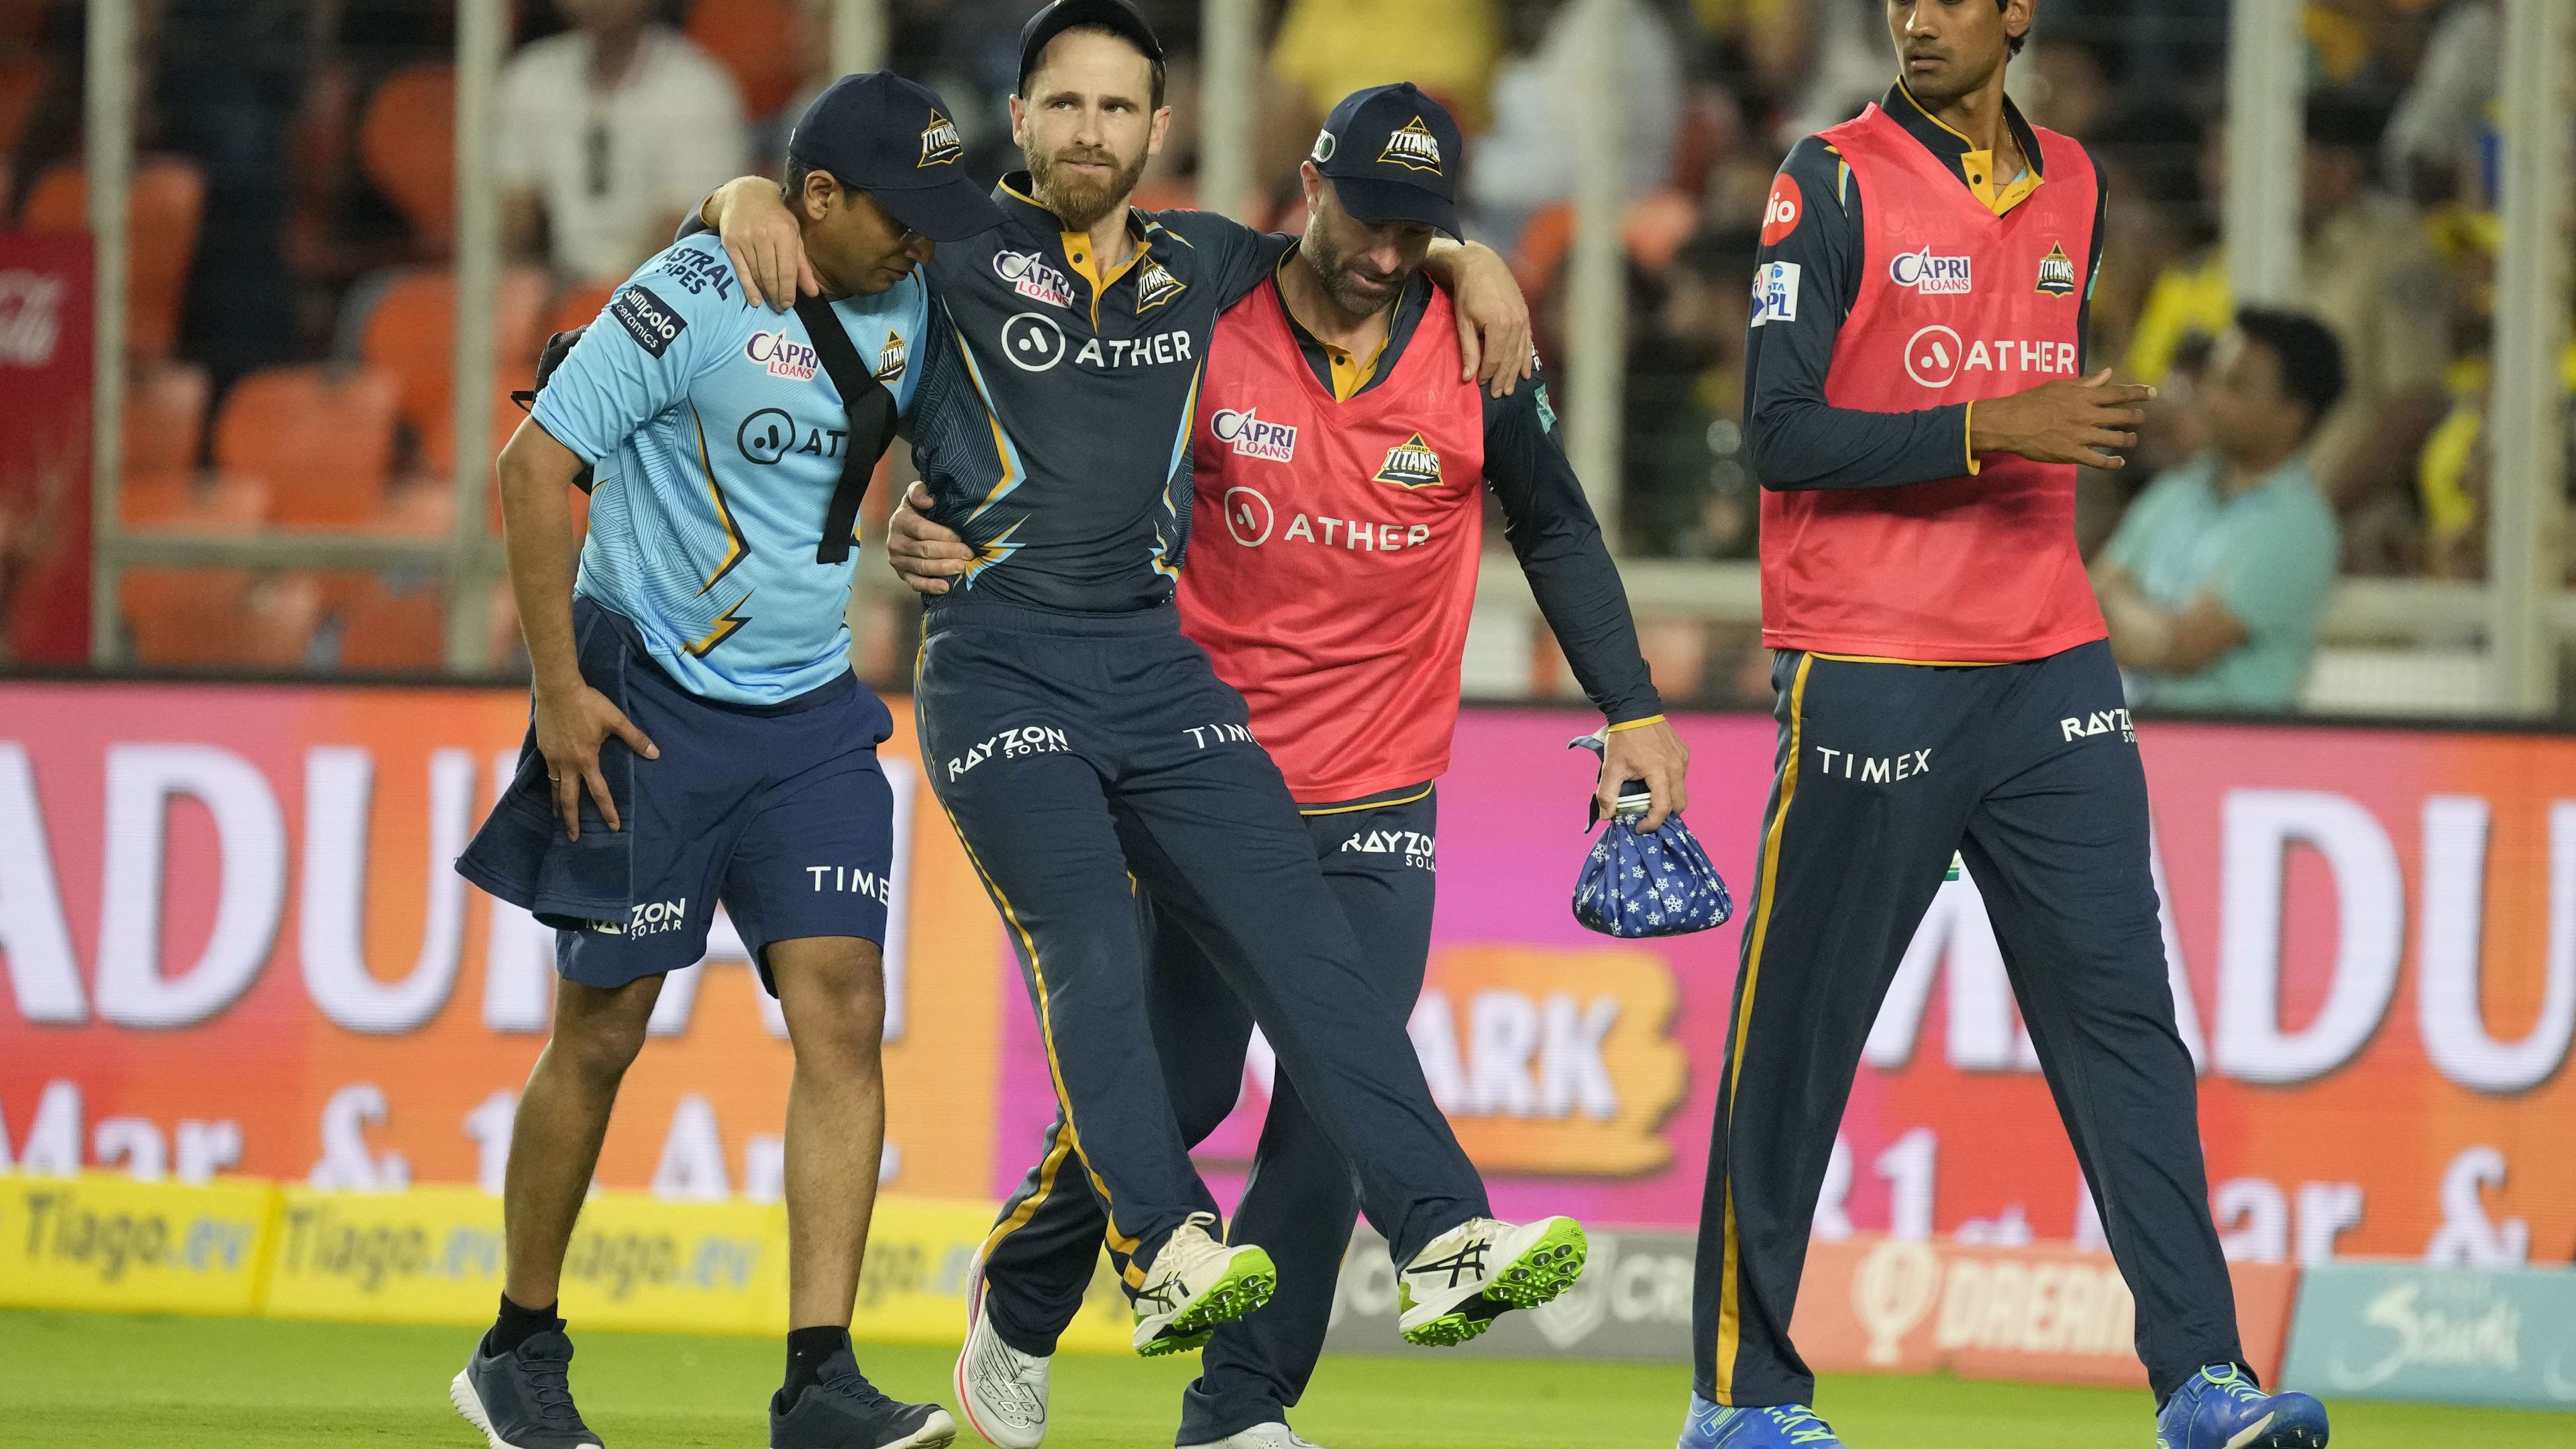 Gujarat Titan&#x27;s Kane Williamson is carried off the field after he got injured while fielding during their Indian Premier League (IPL) match against Chennai Super Kings in Ahmedabad.